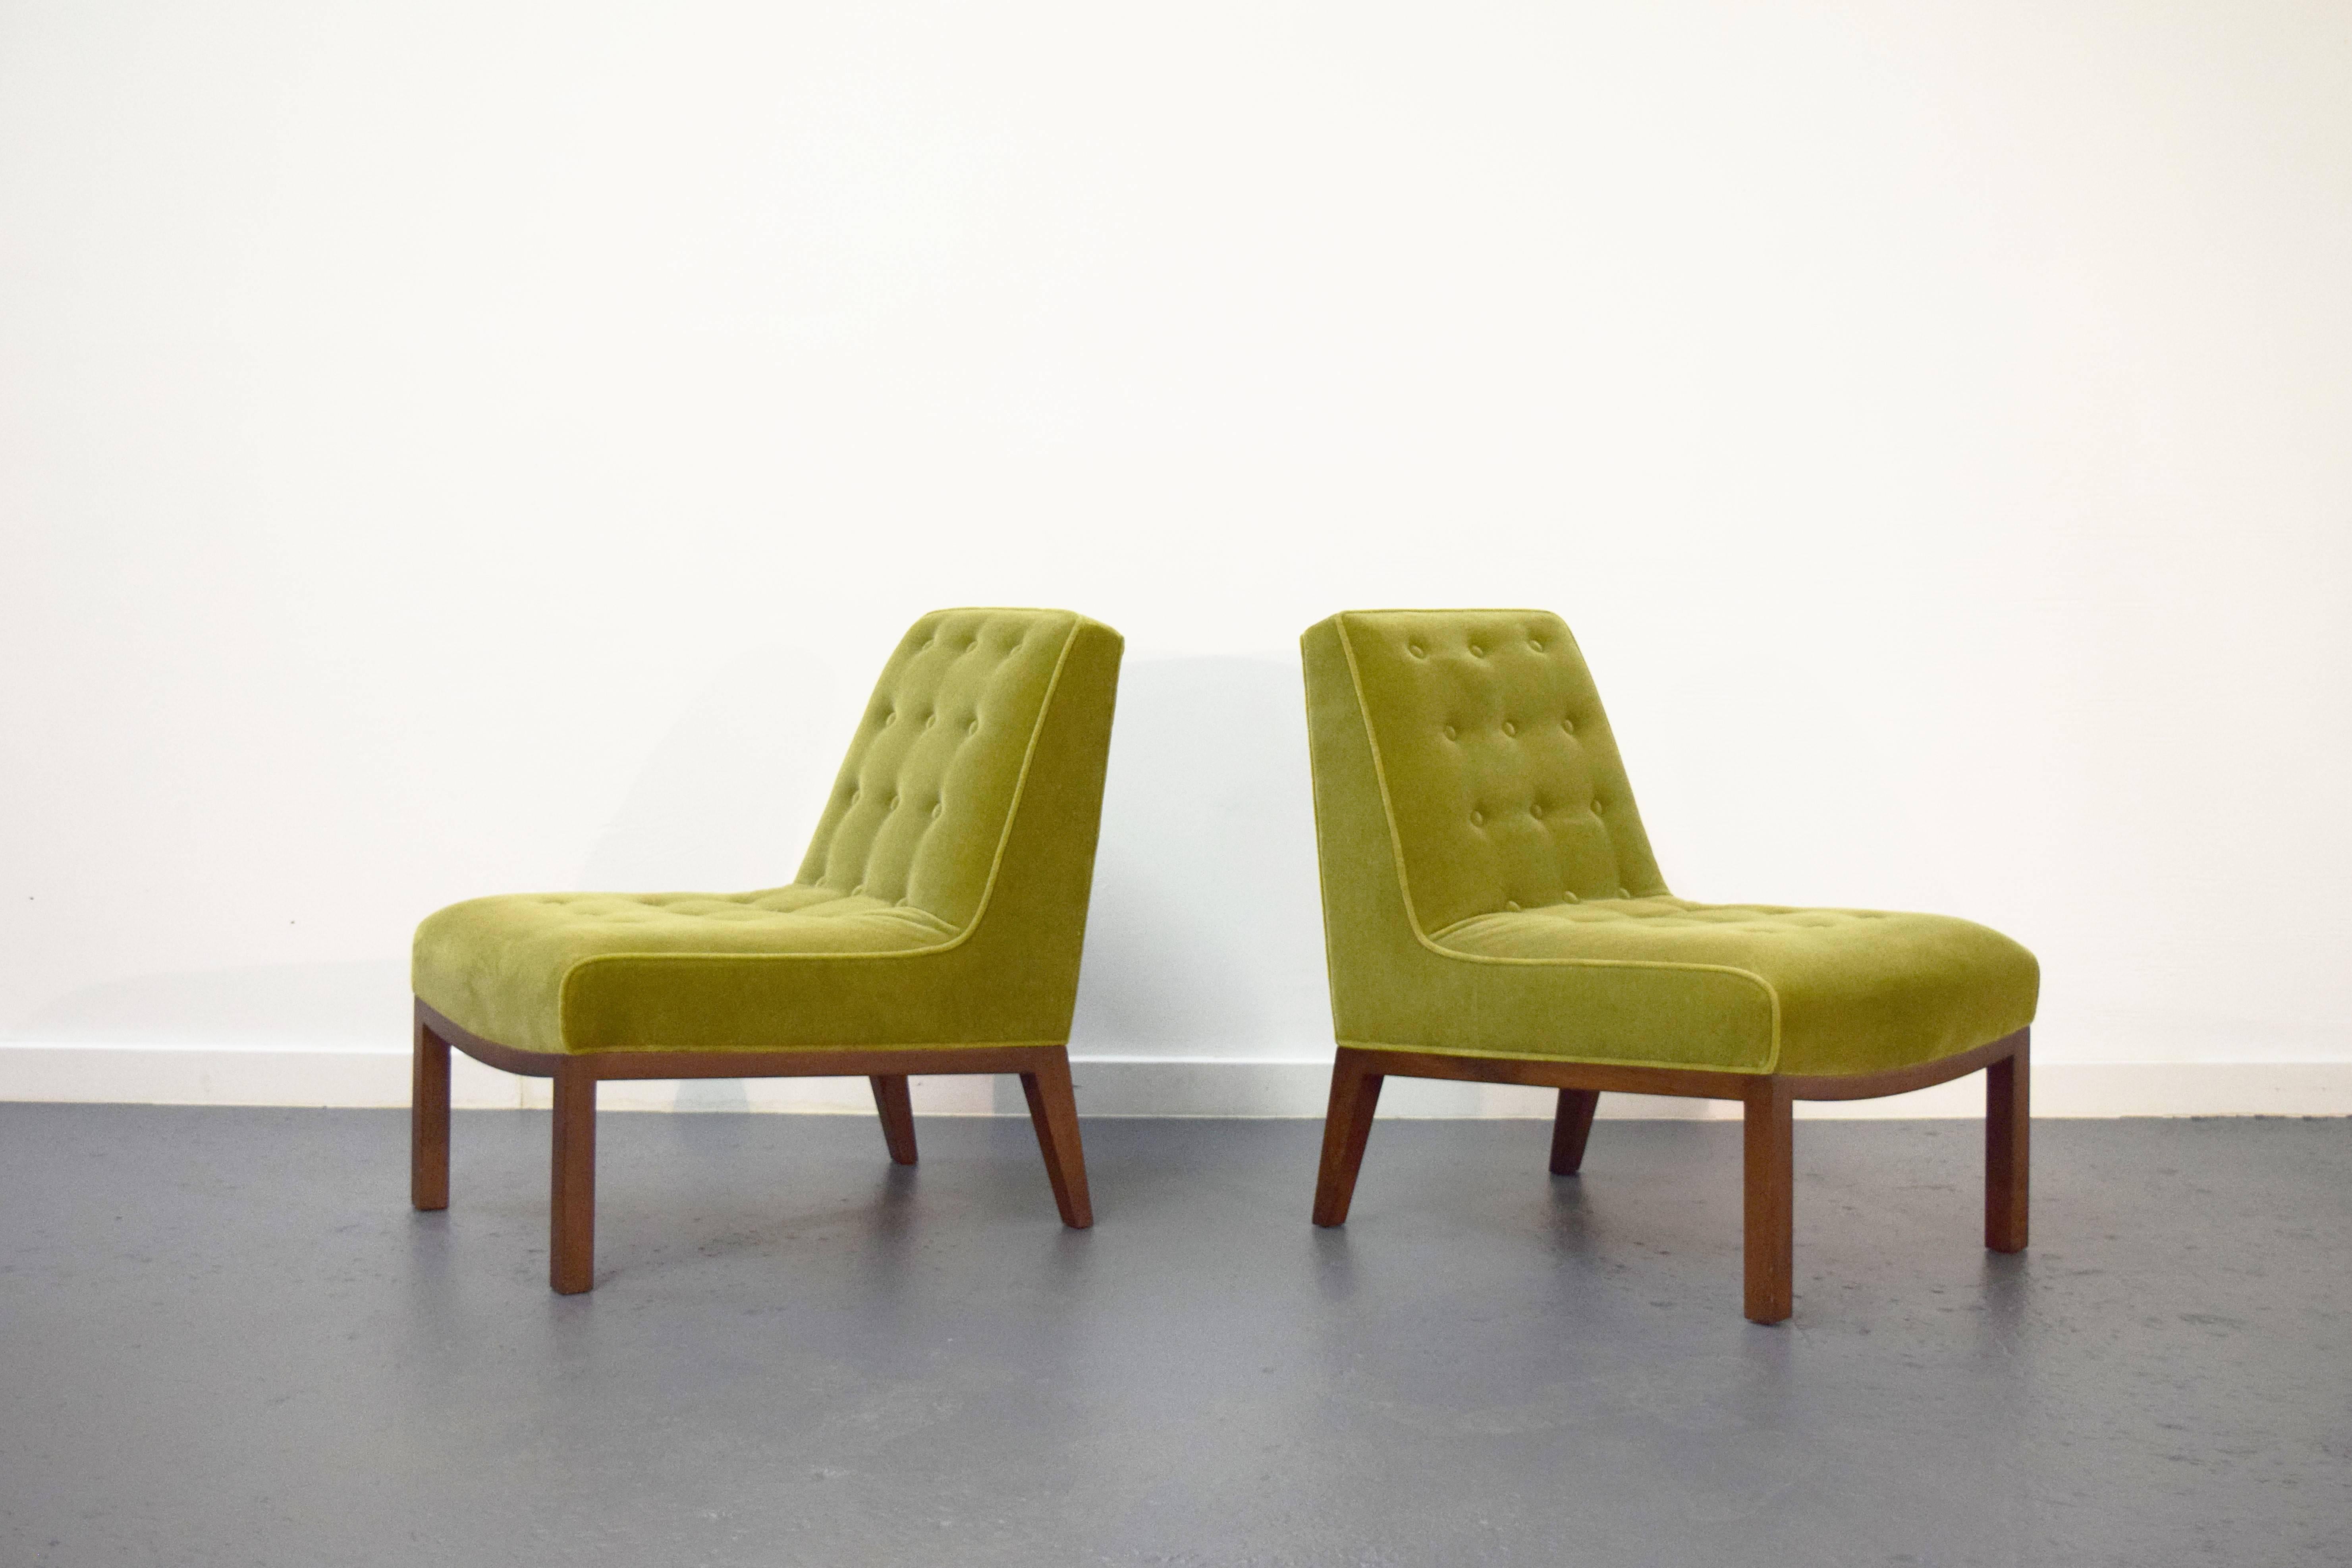 Pair of slipper chairs by Edward Wormley for Dunbar. Chairs are reupholstered in a Maharam Mohair.